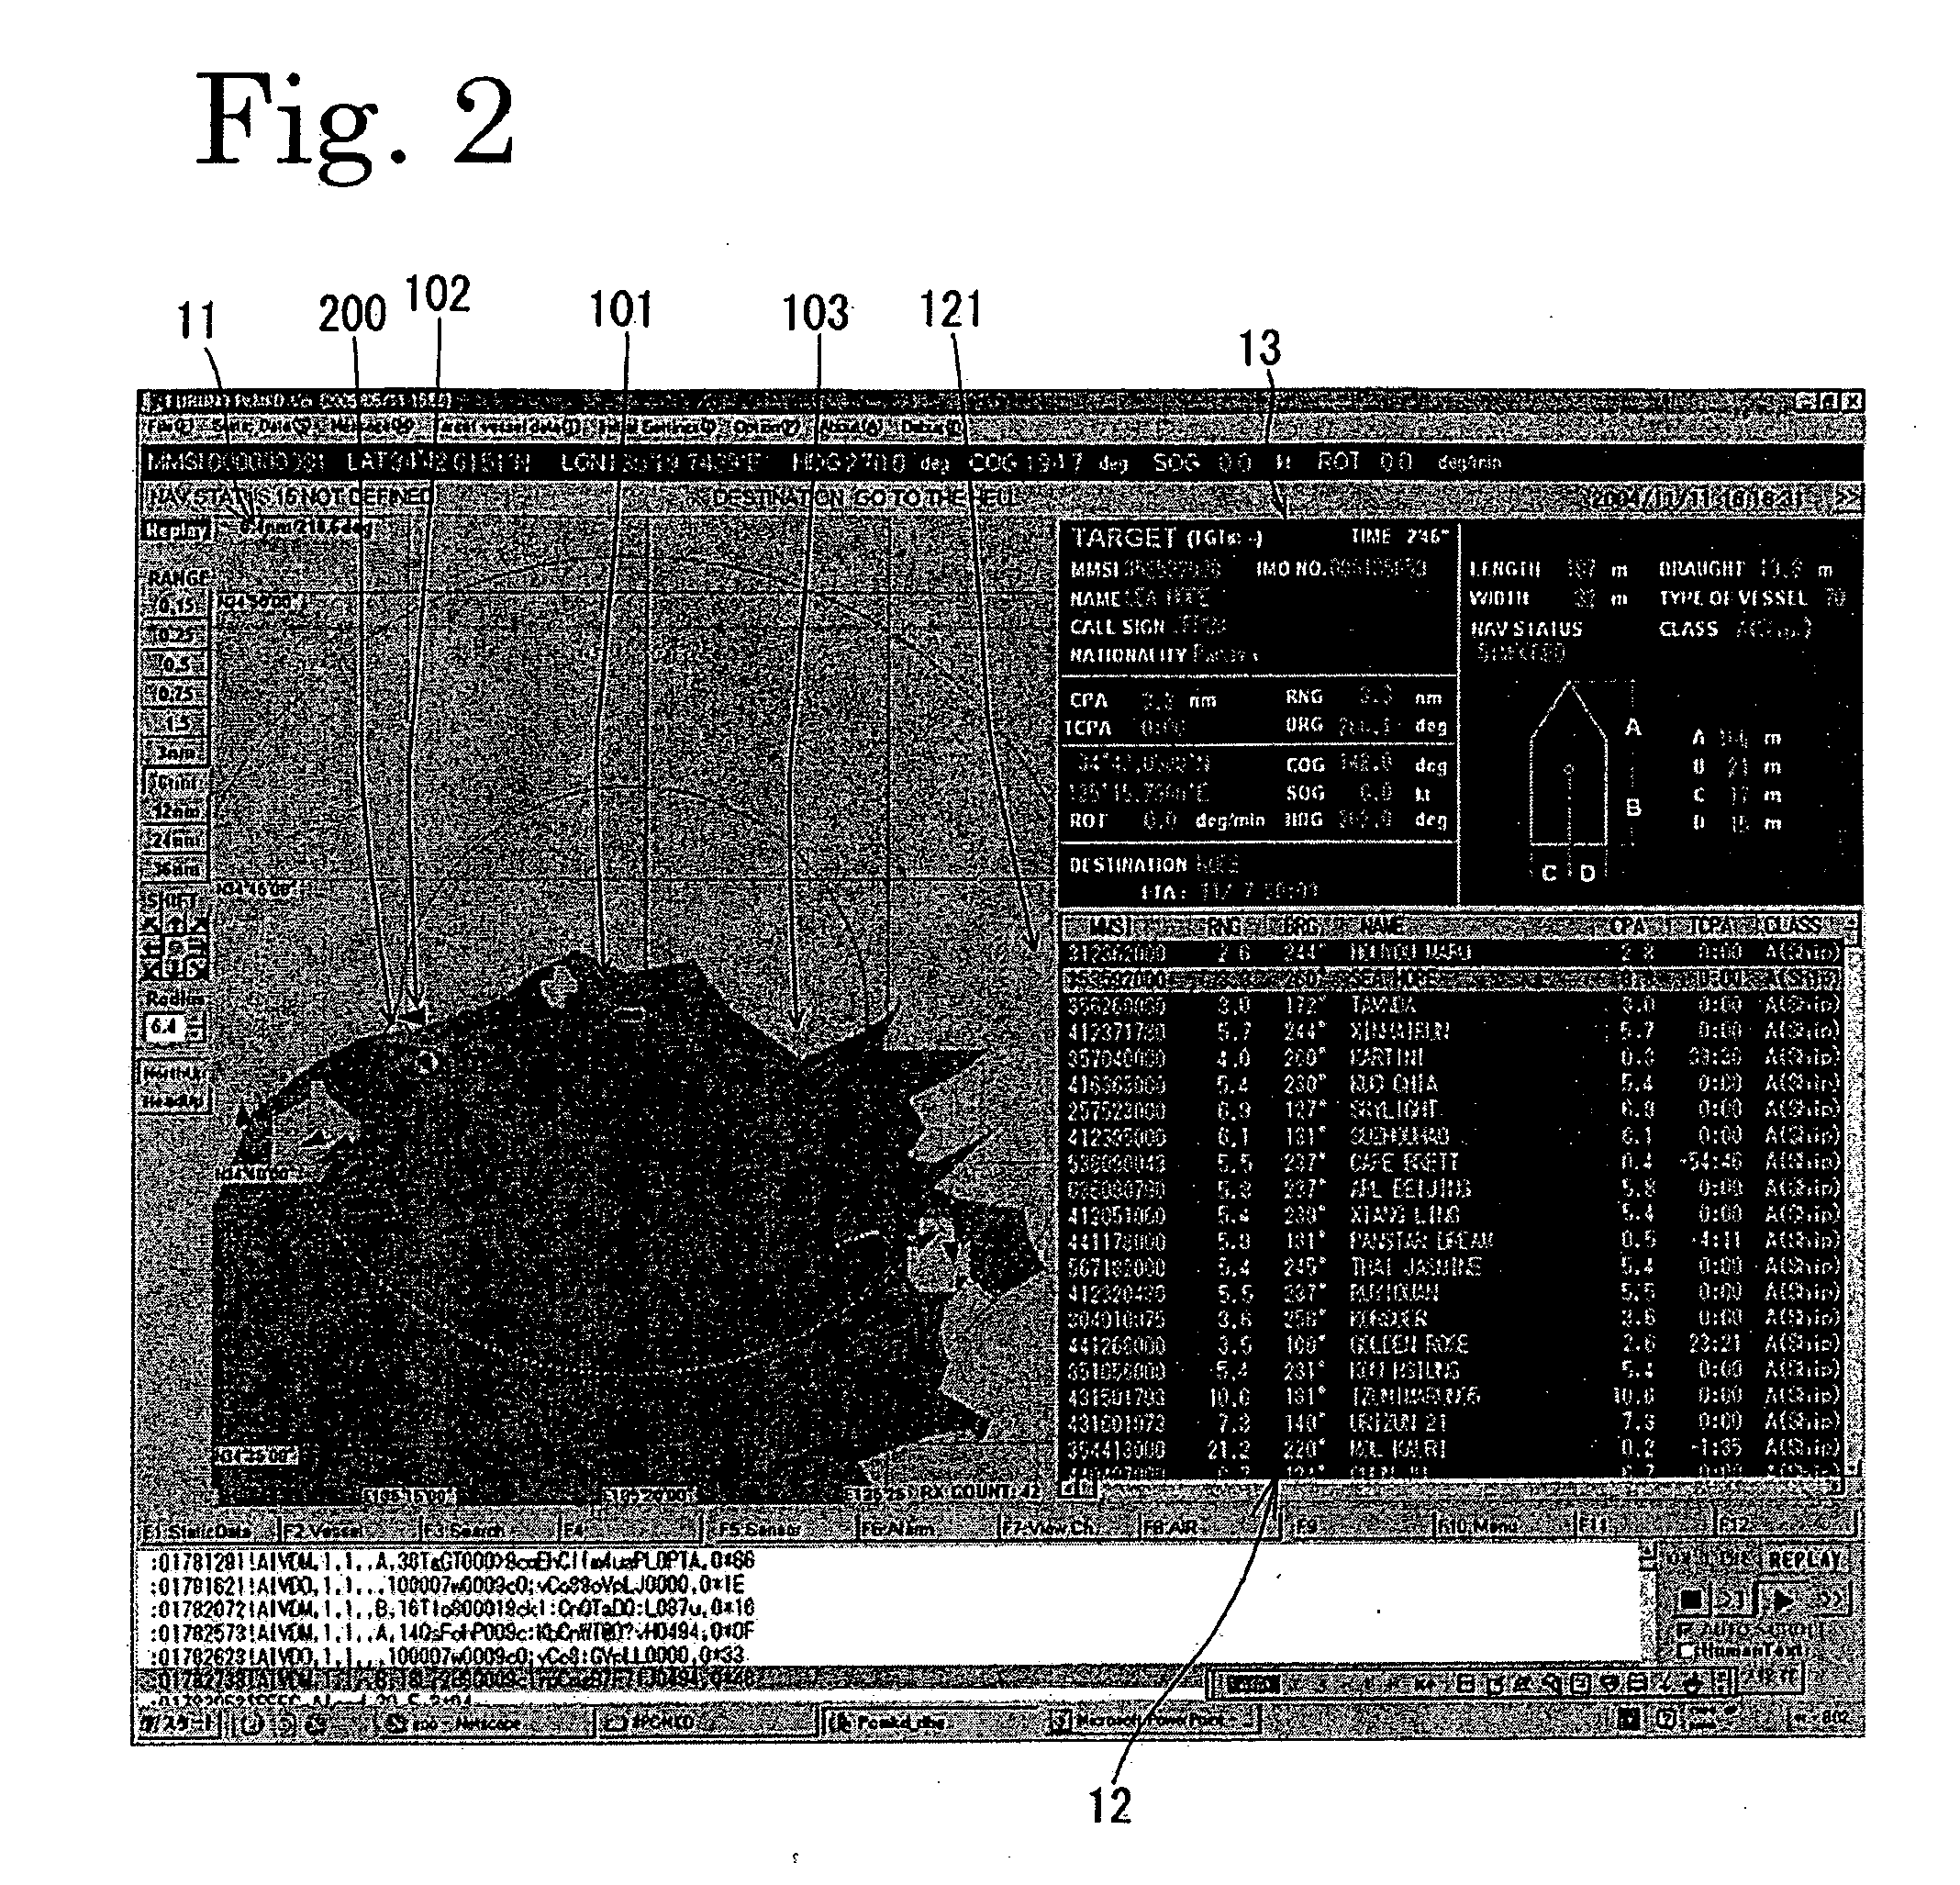 Device for Displaying Other Ship Targets